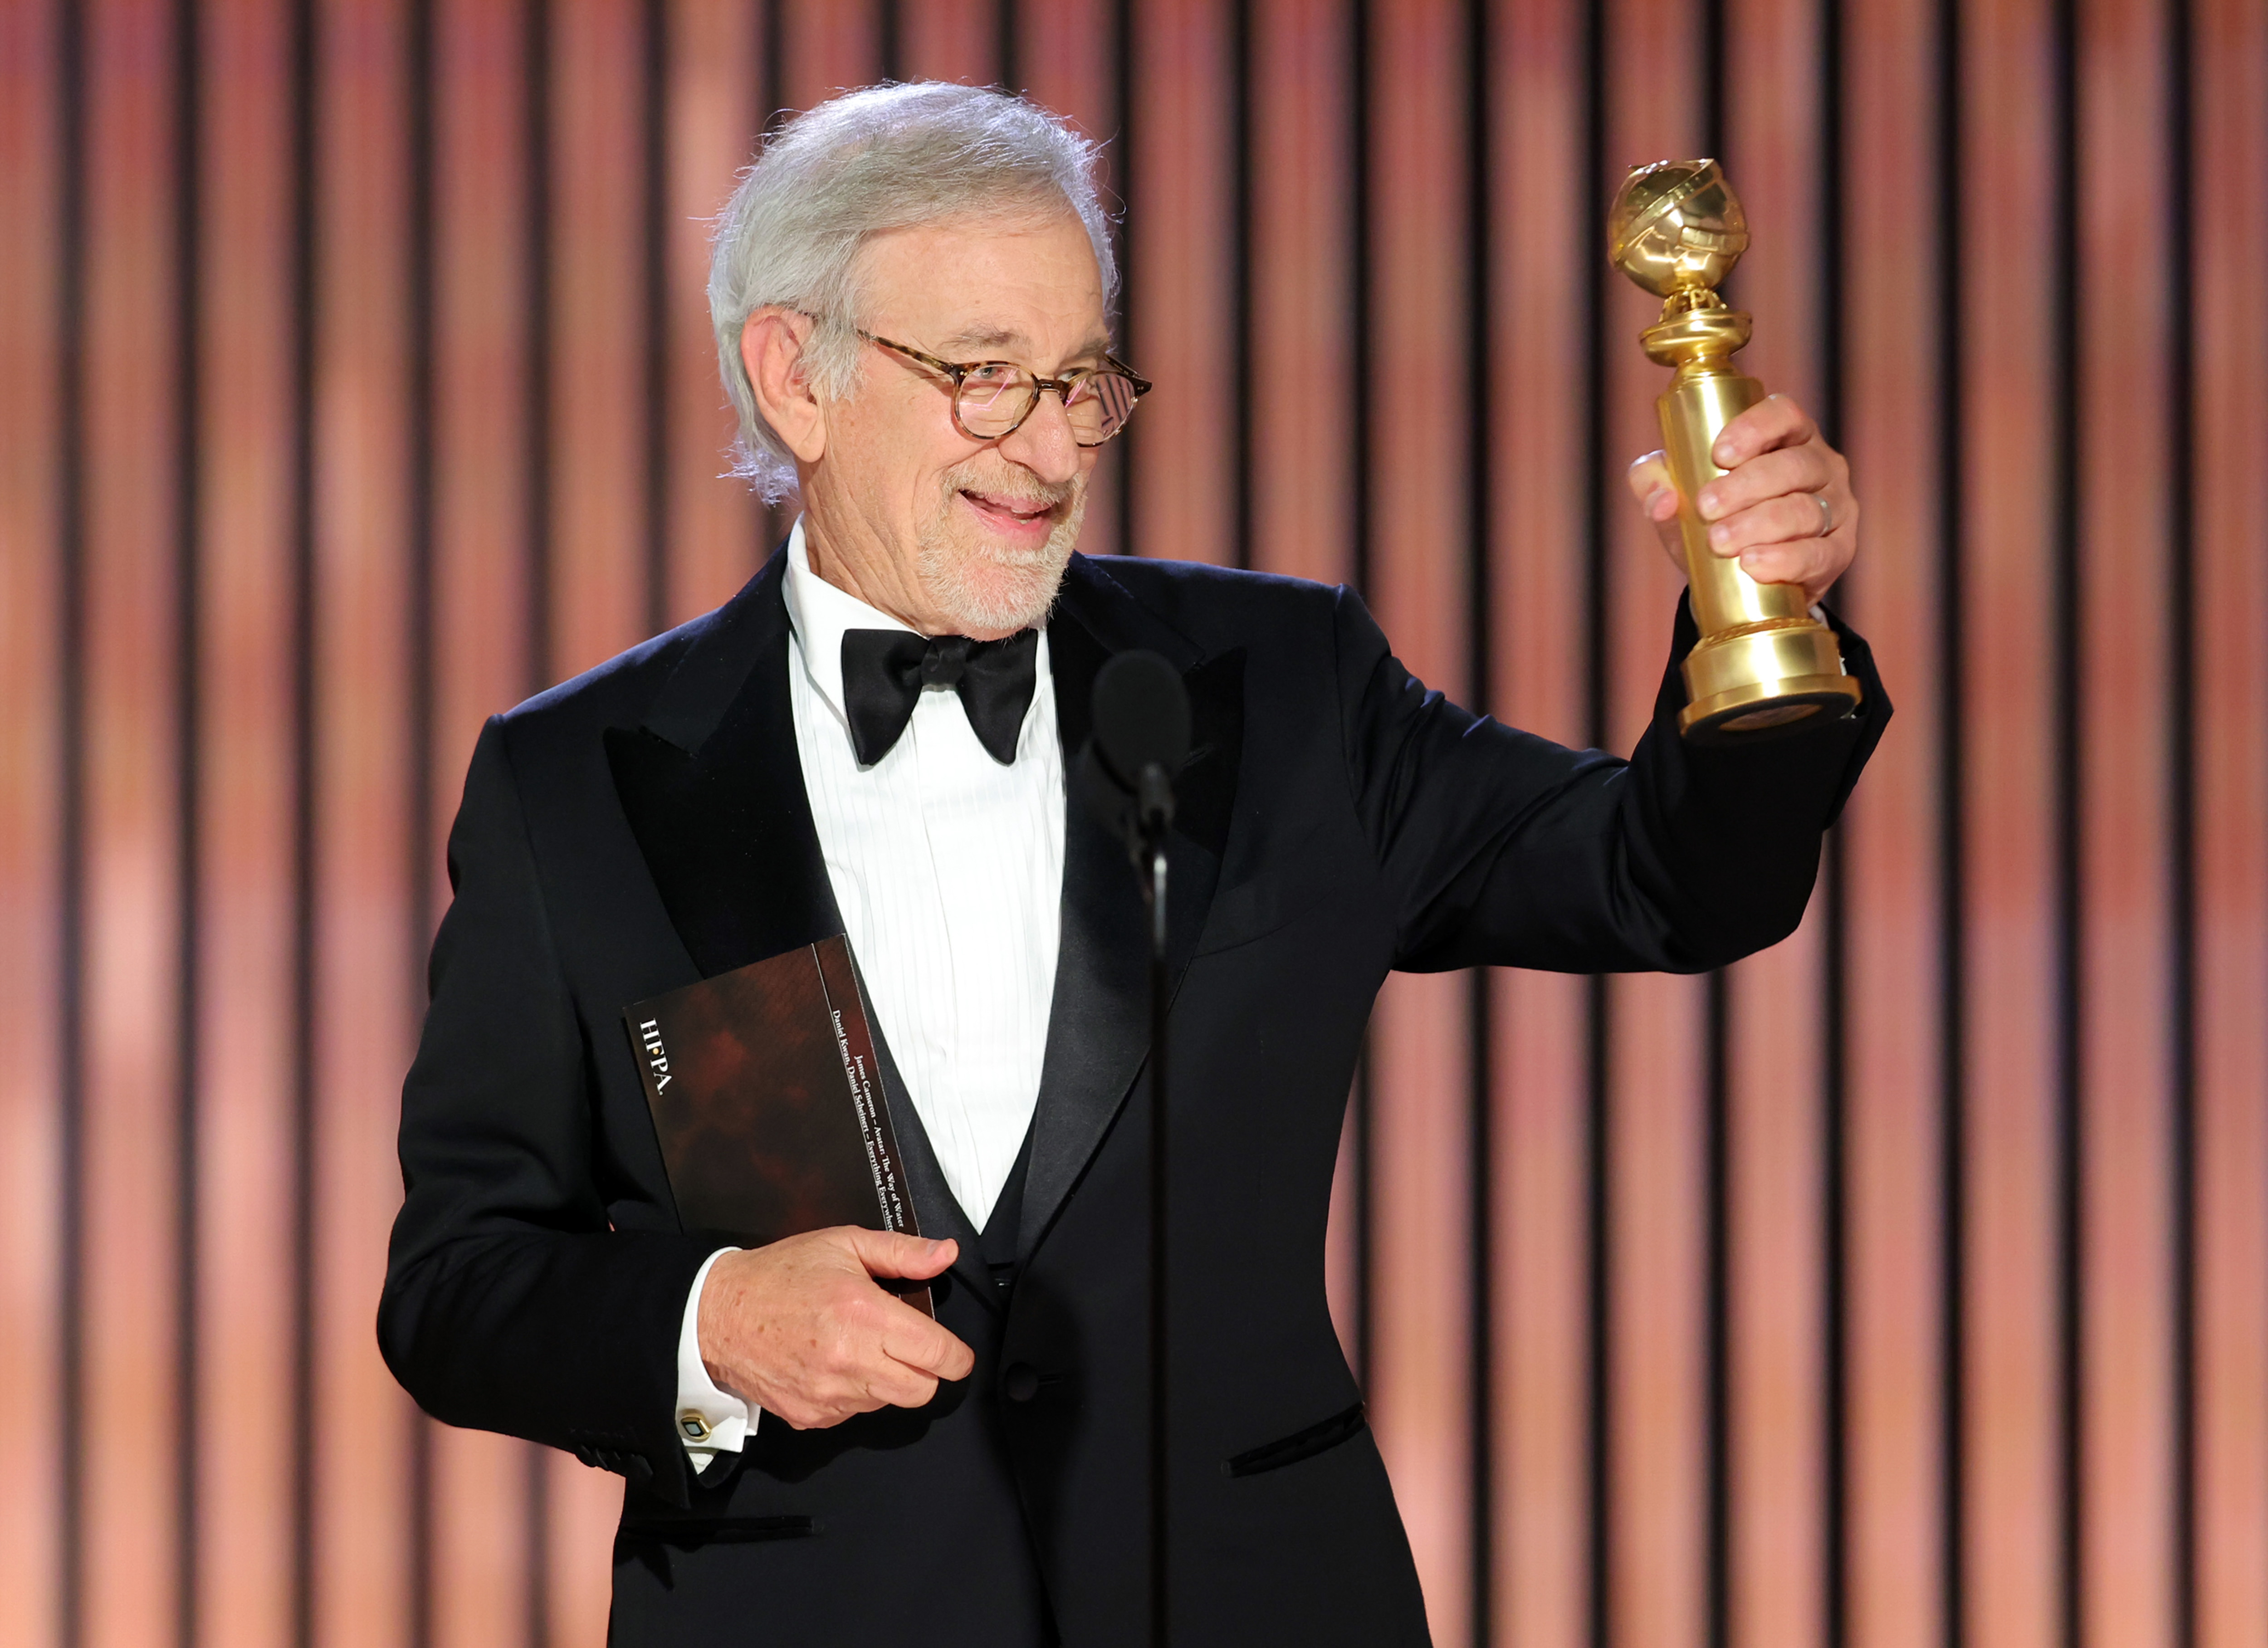 Steven Spielberg accepts the Best Director award for "The Fabelmans" onstage at the 80th Annual Golden Globe Awards 